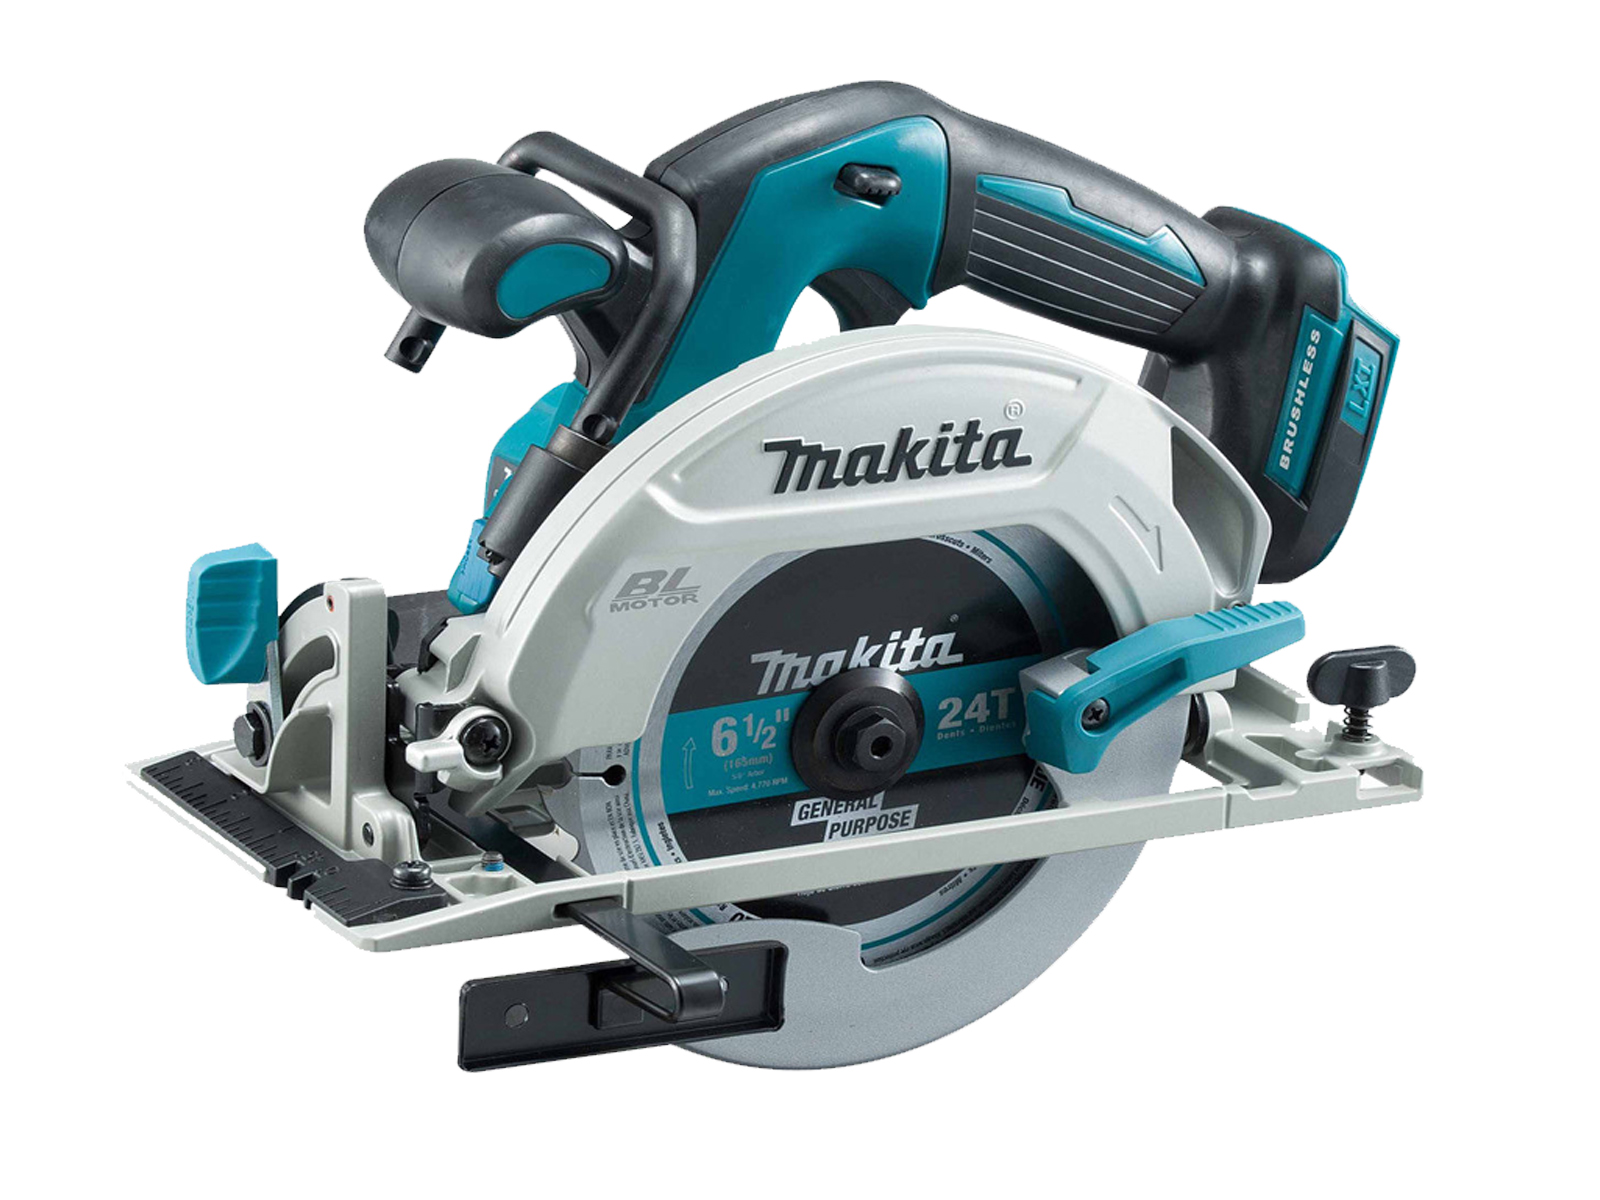 Makita DHS680 18V Brushless 165mm Circular Saw LXT - Body Only